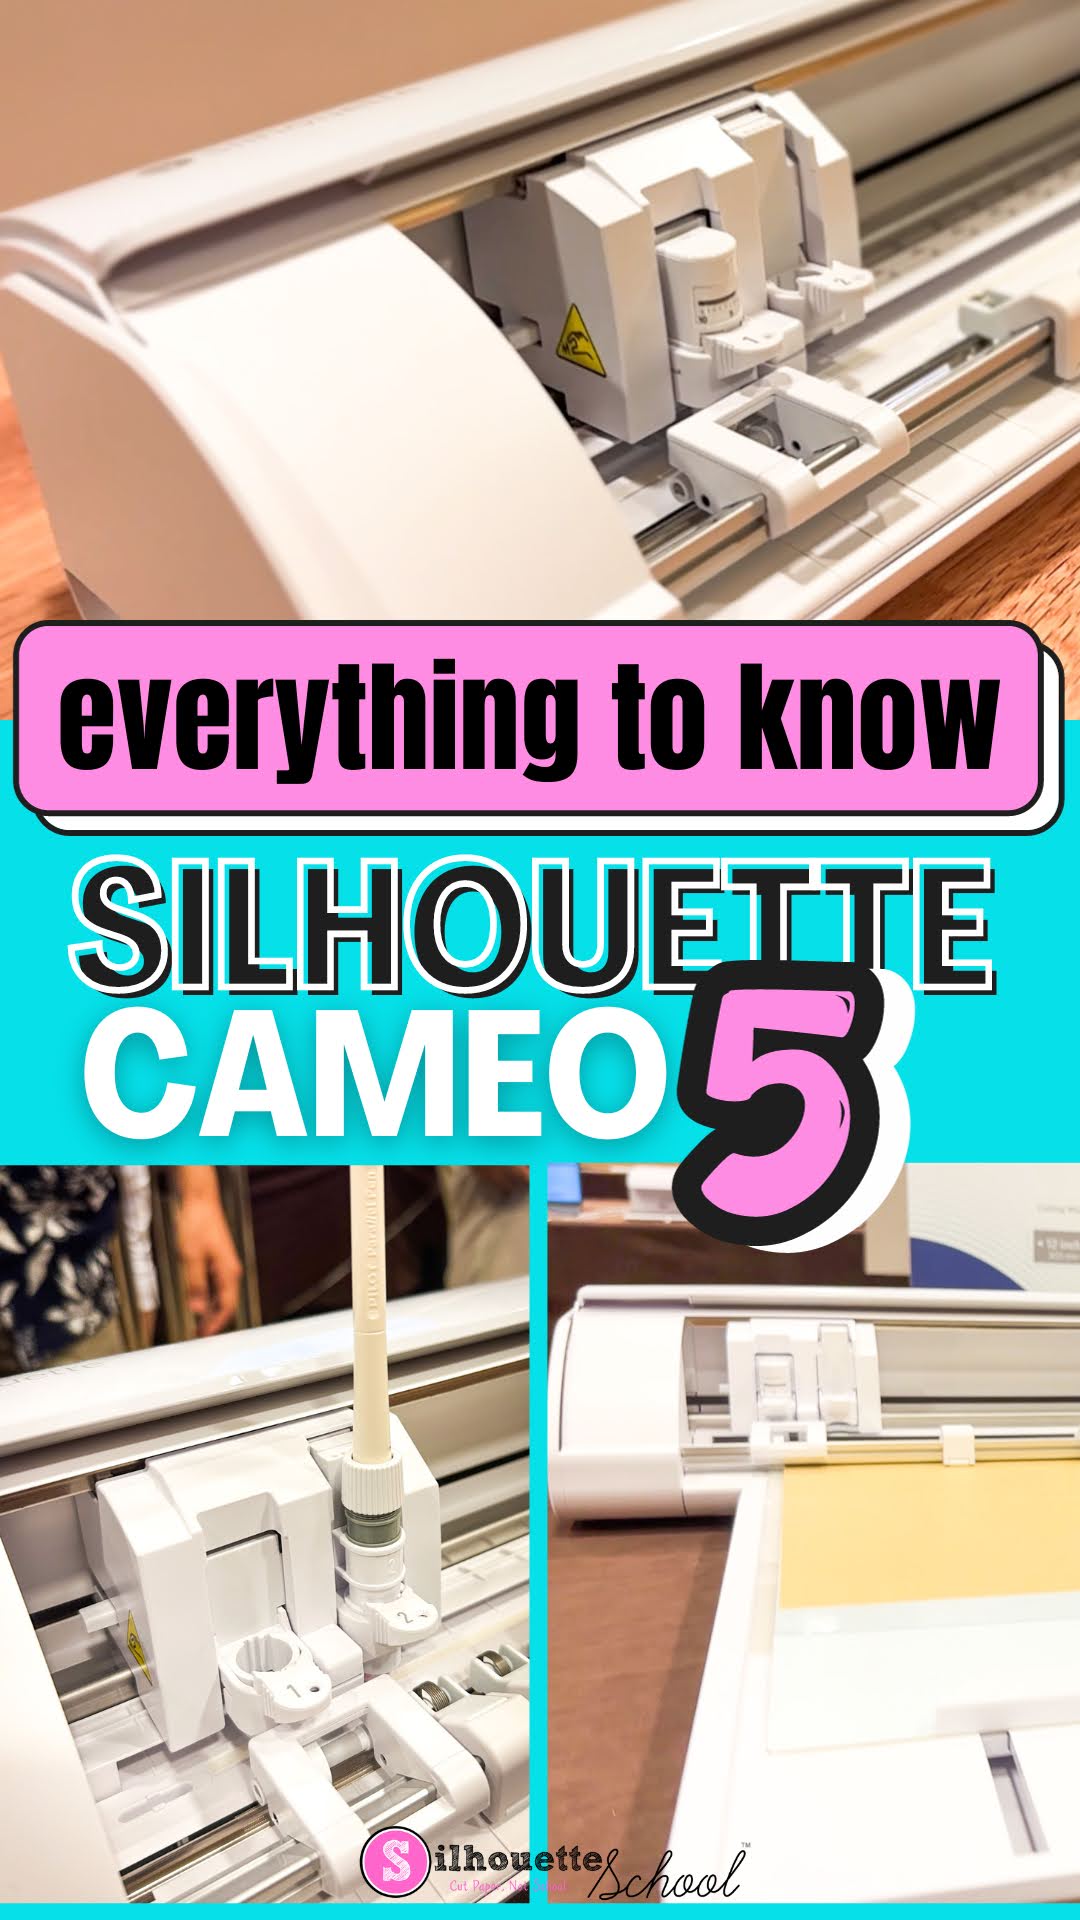 Should I Get the Silhouette Cameo 4 or 5? 